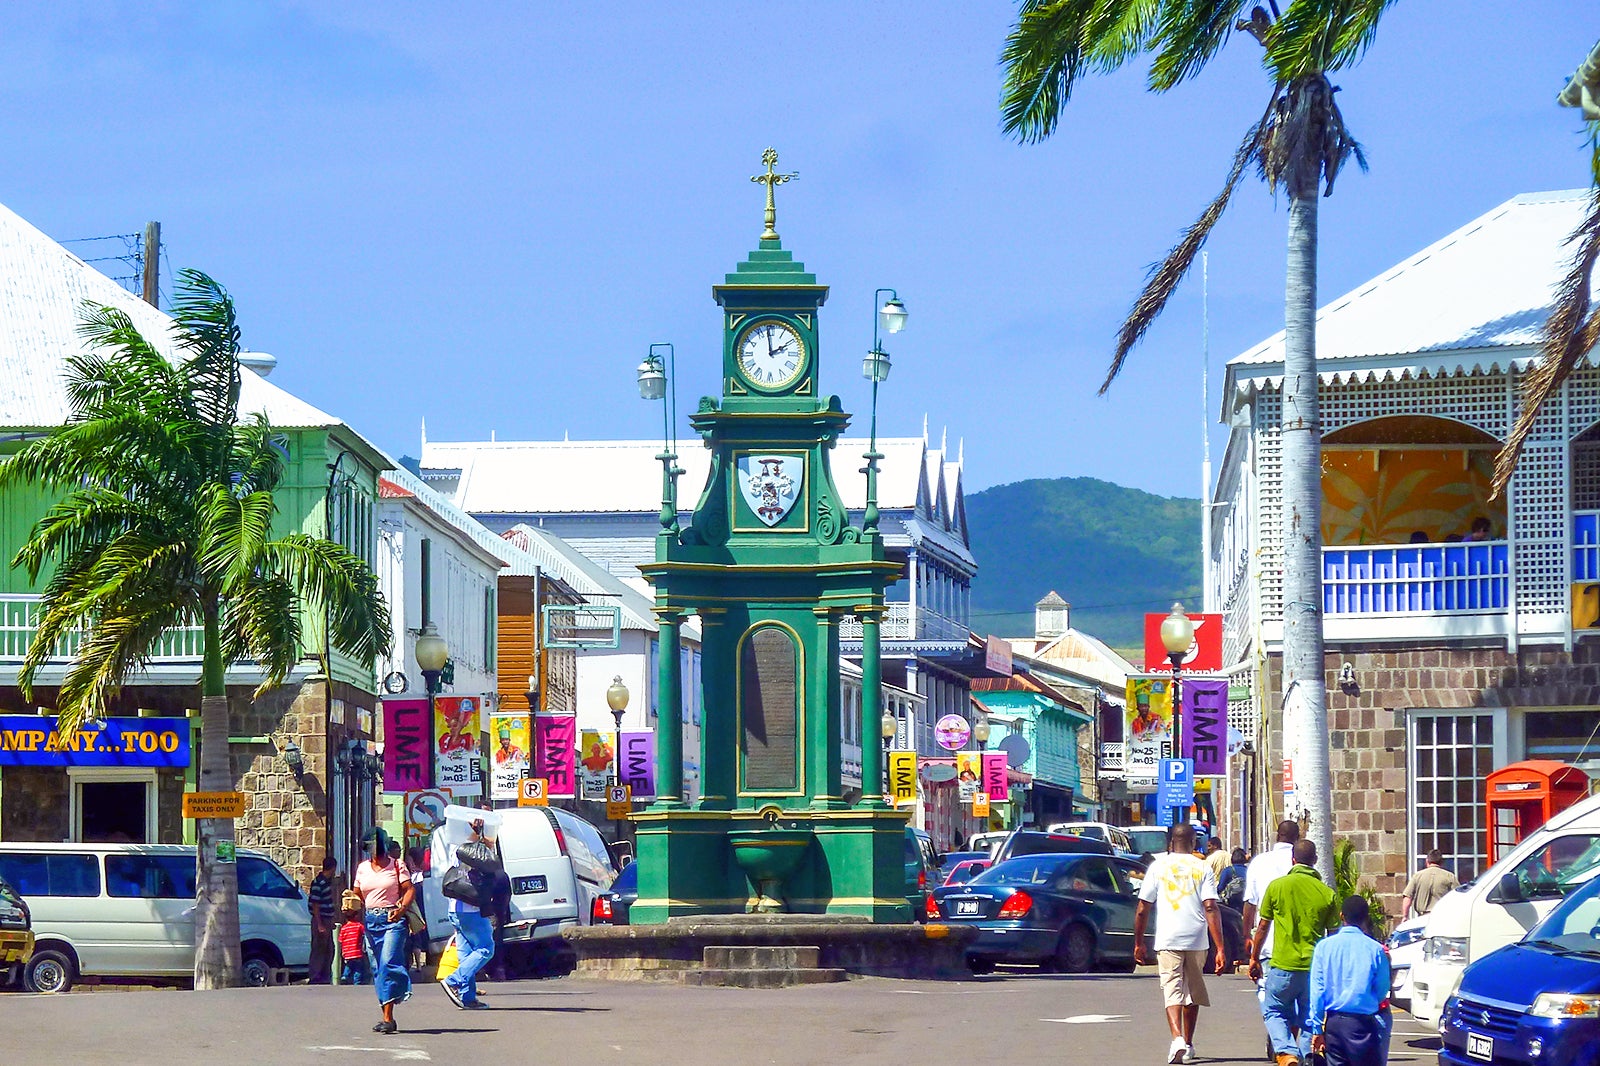 North American Countries Quiz Basseterre, St. Kitts and Nevis